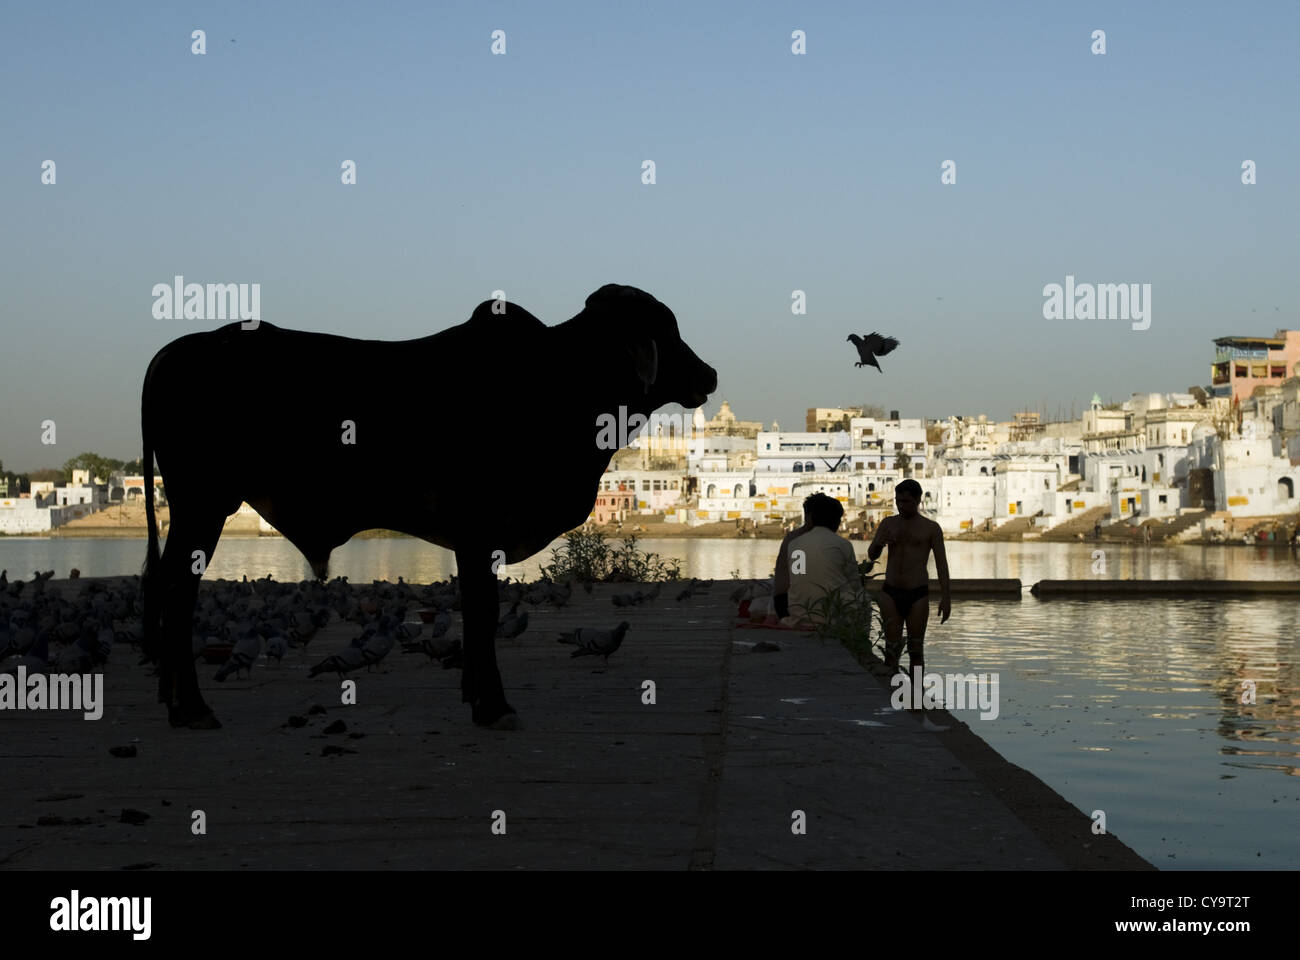 A bird hovers near an Indian sacred cow that is silhouetted against the early morning light in Pushkar, Rajasthan, India Stock Photo